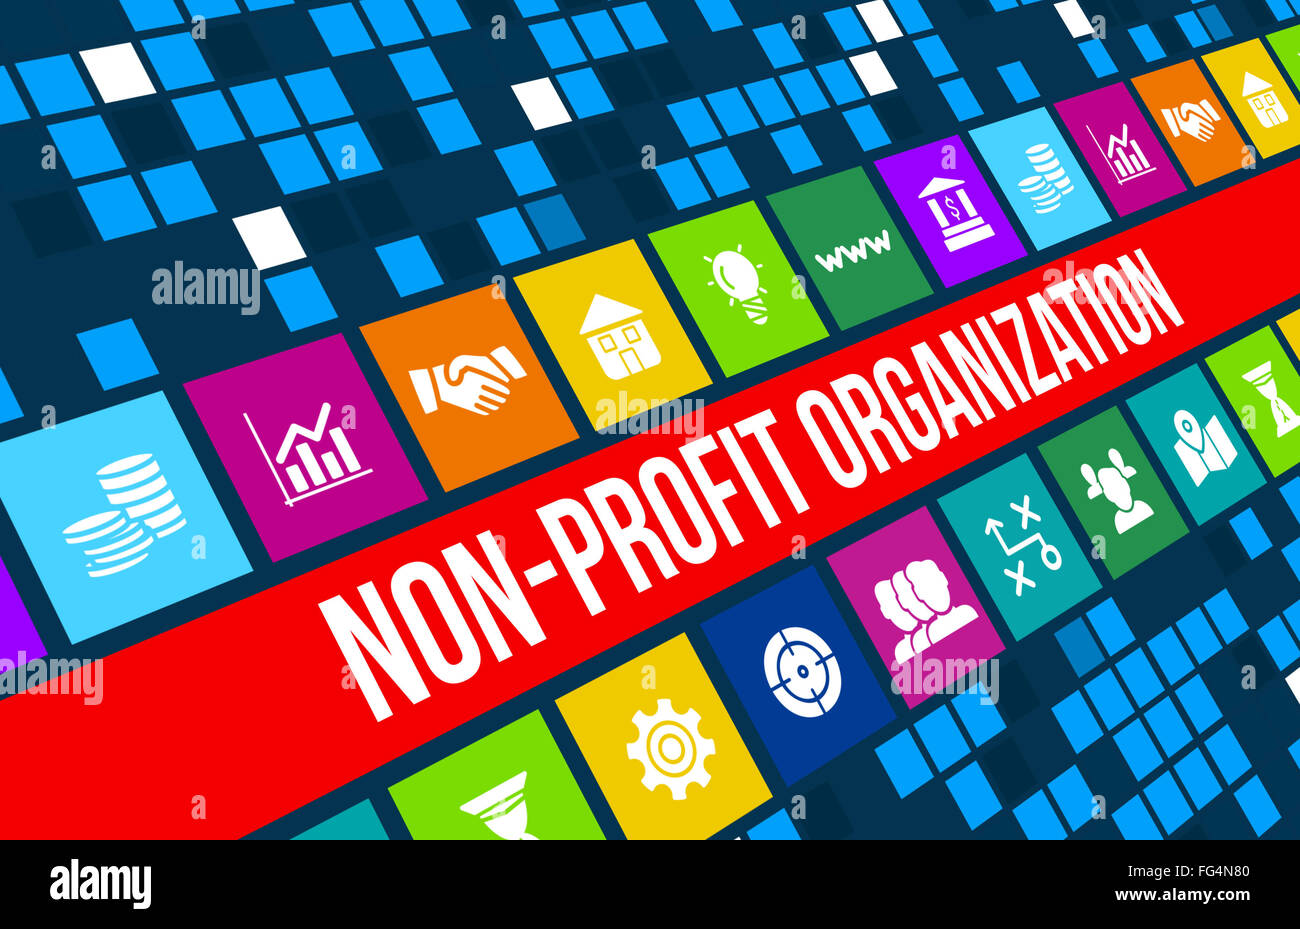 Non-profit organization  concept image with business icons and copyspace. Stock Photo